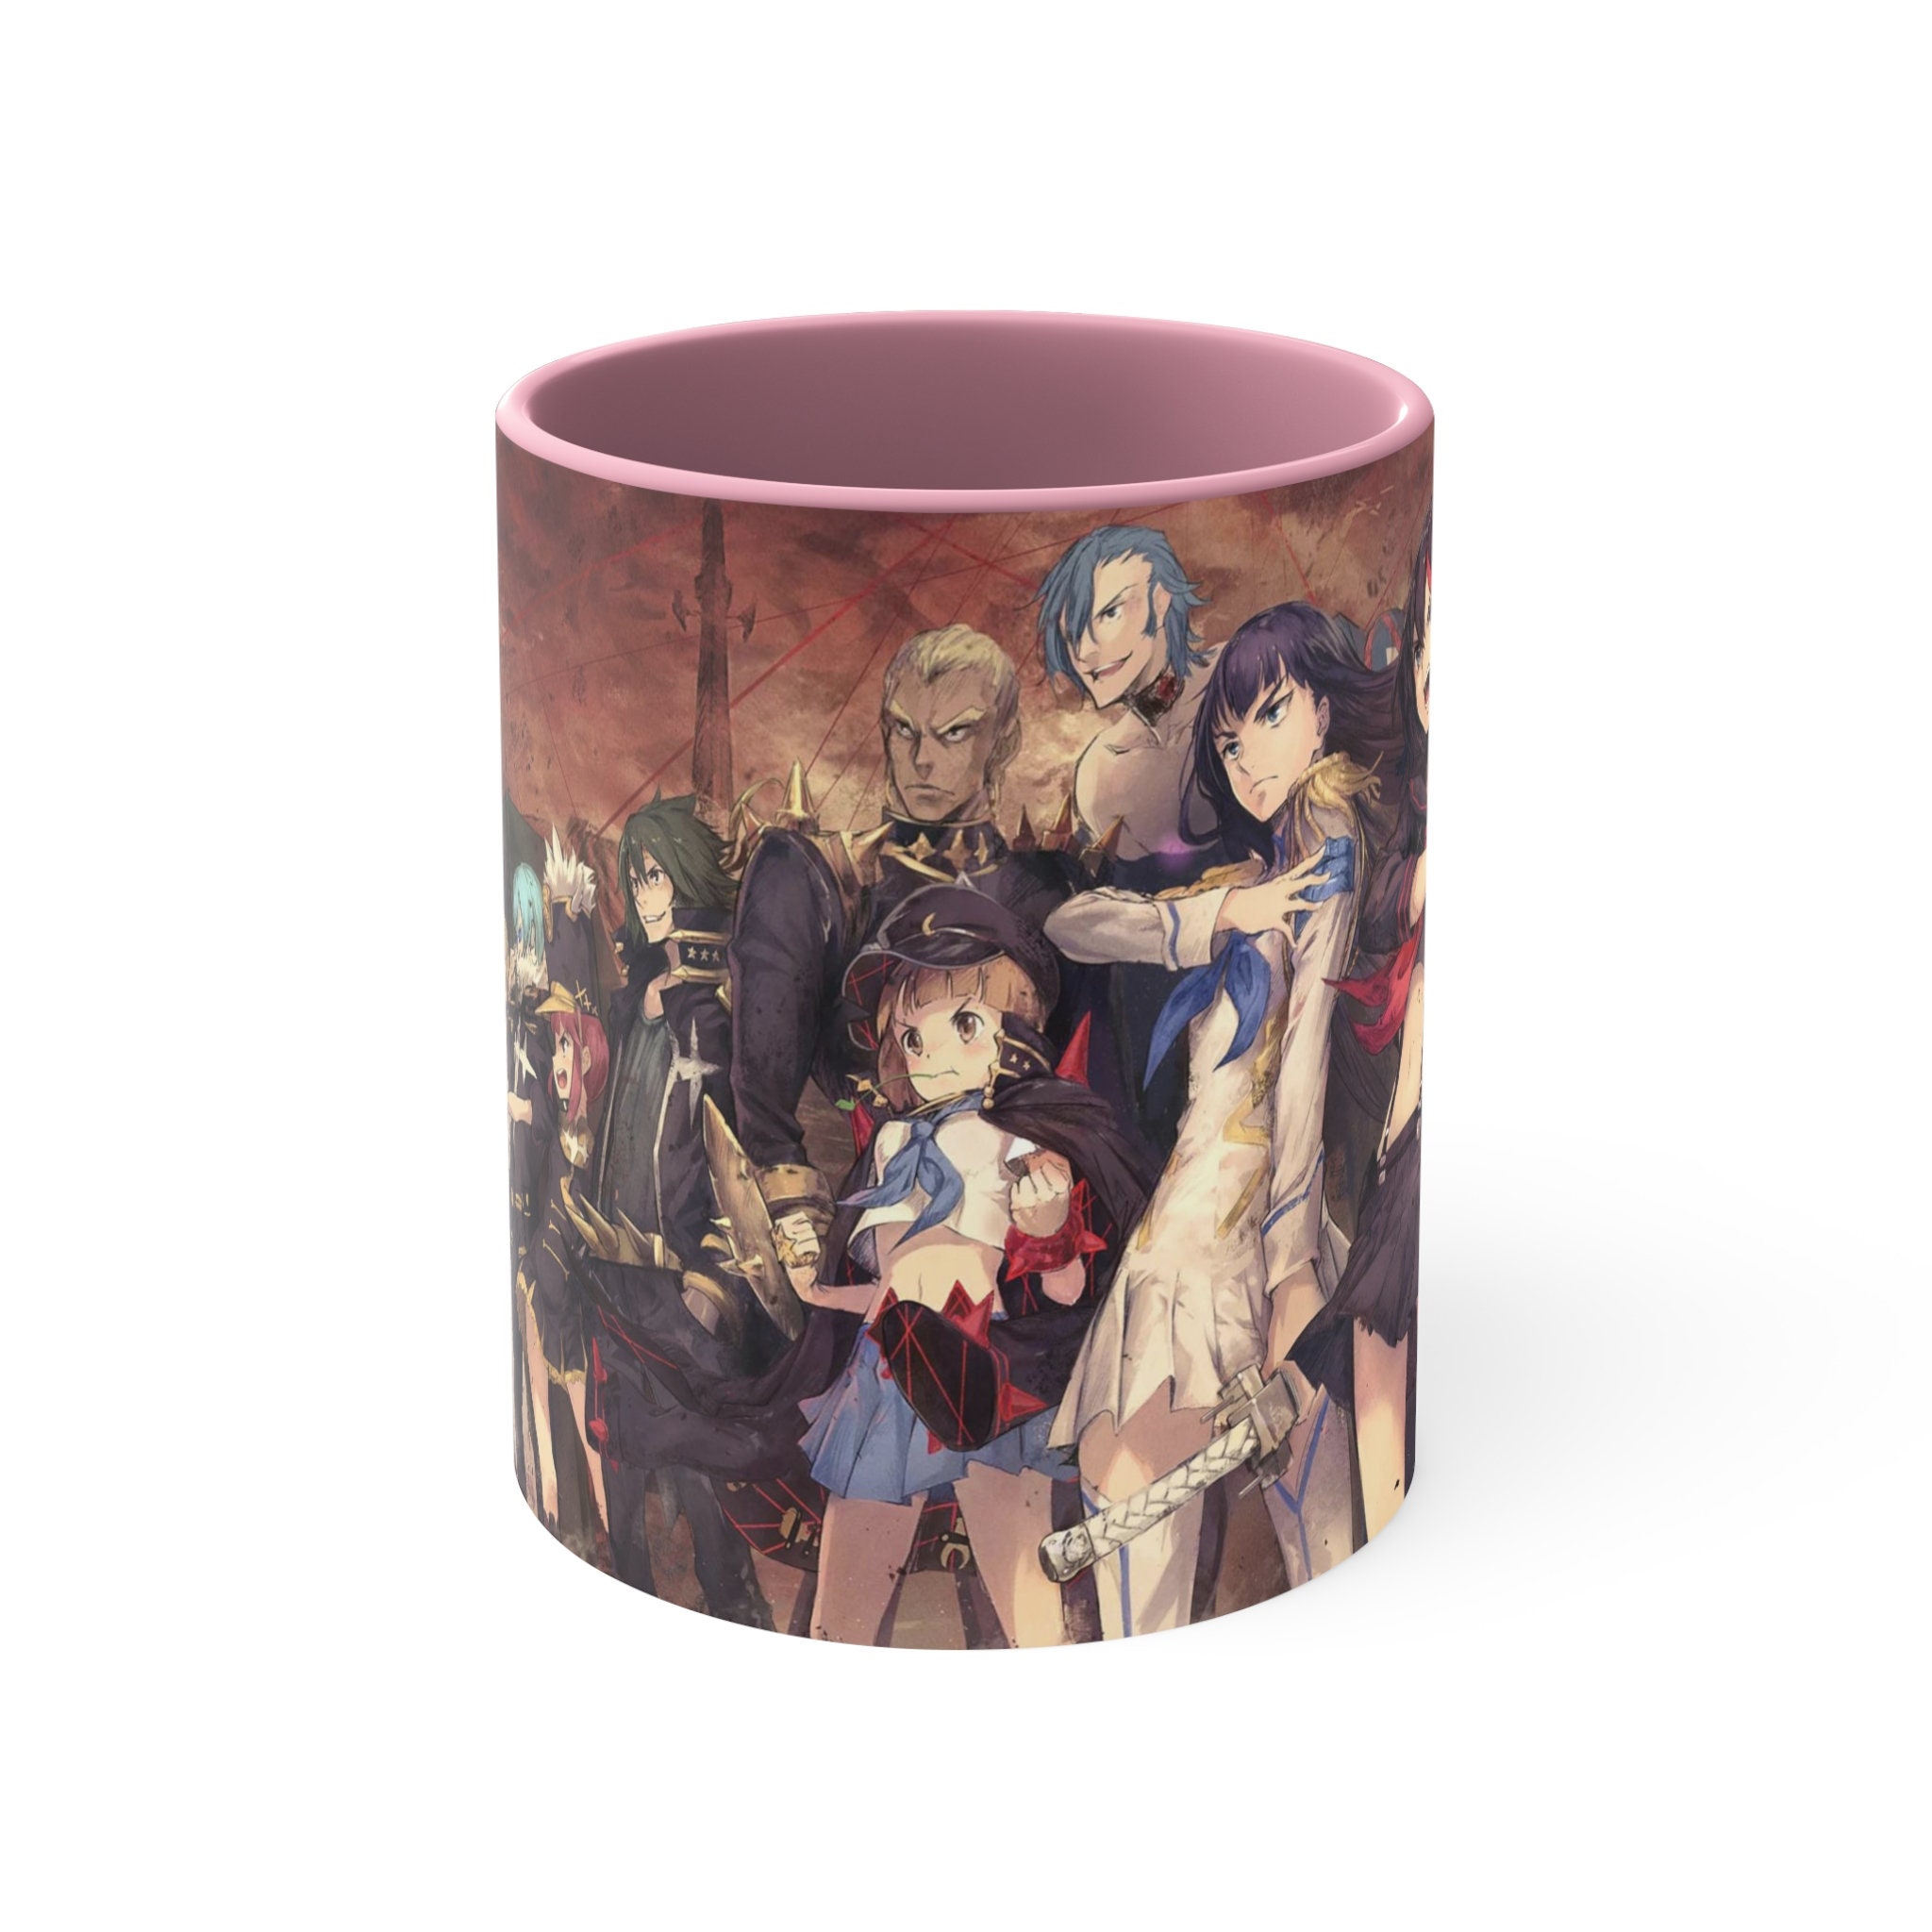 37 Inspiring Gifts For Anime Lovers That They Will Adore  Loveable